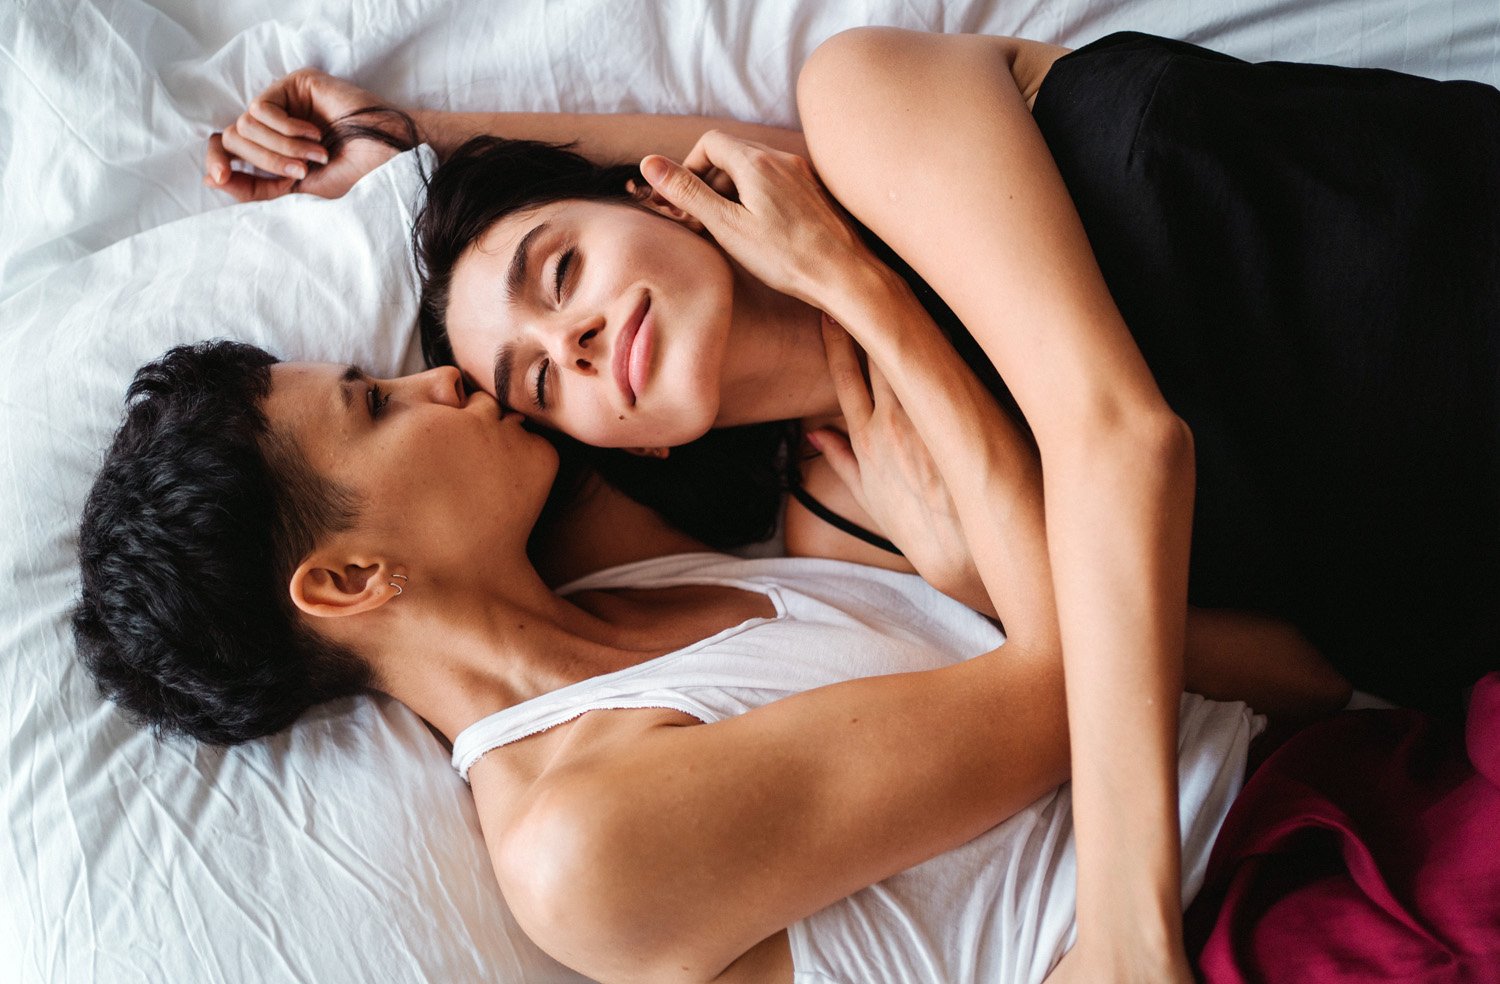 Two women in bed, practicing the psychology of female arousal